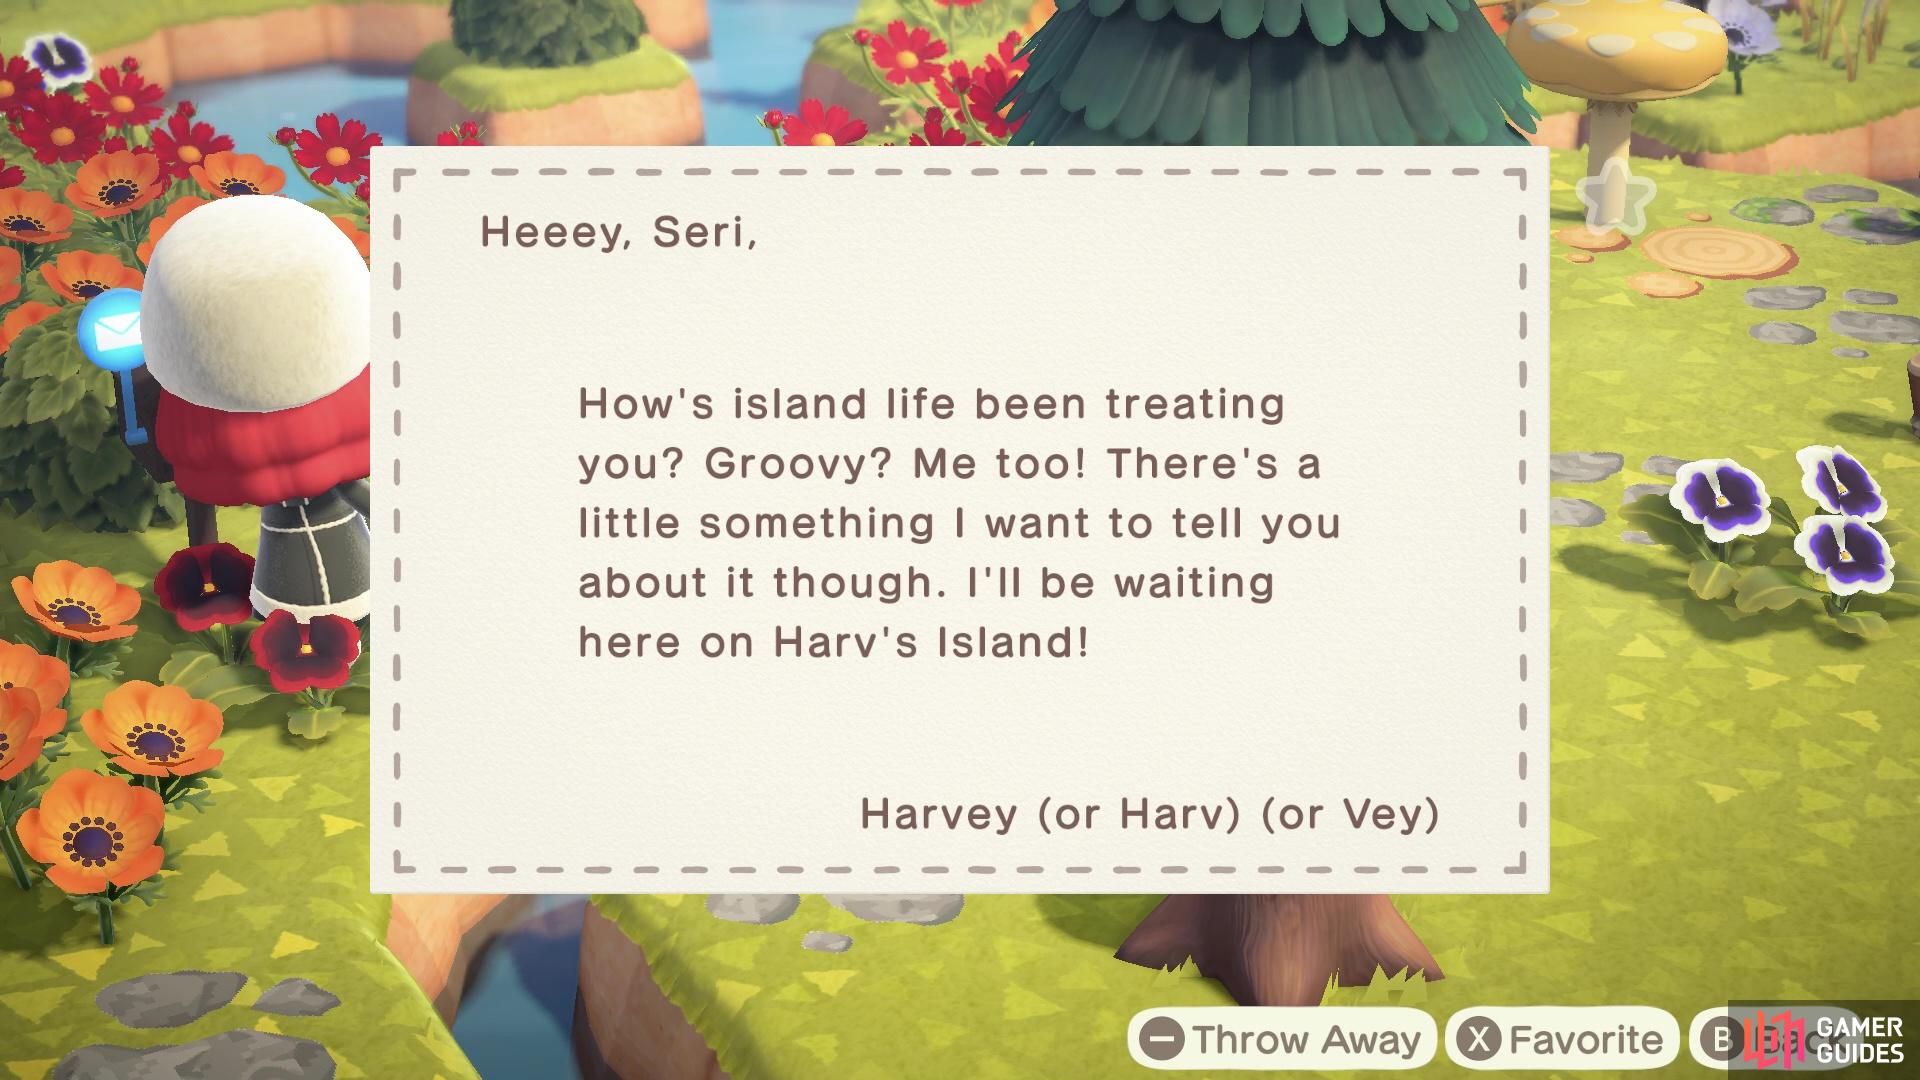 You’ve been summoned to Harv’s Island!